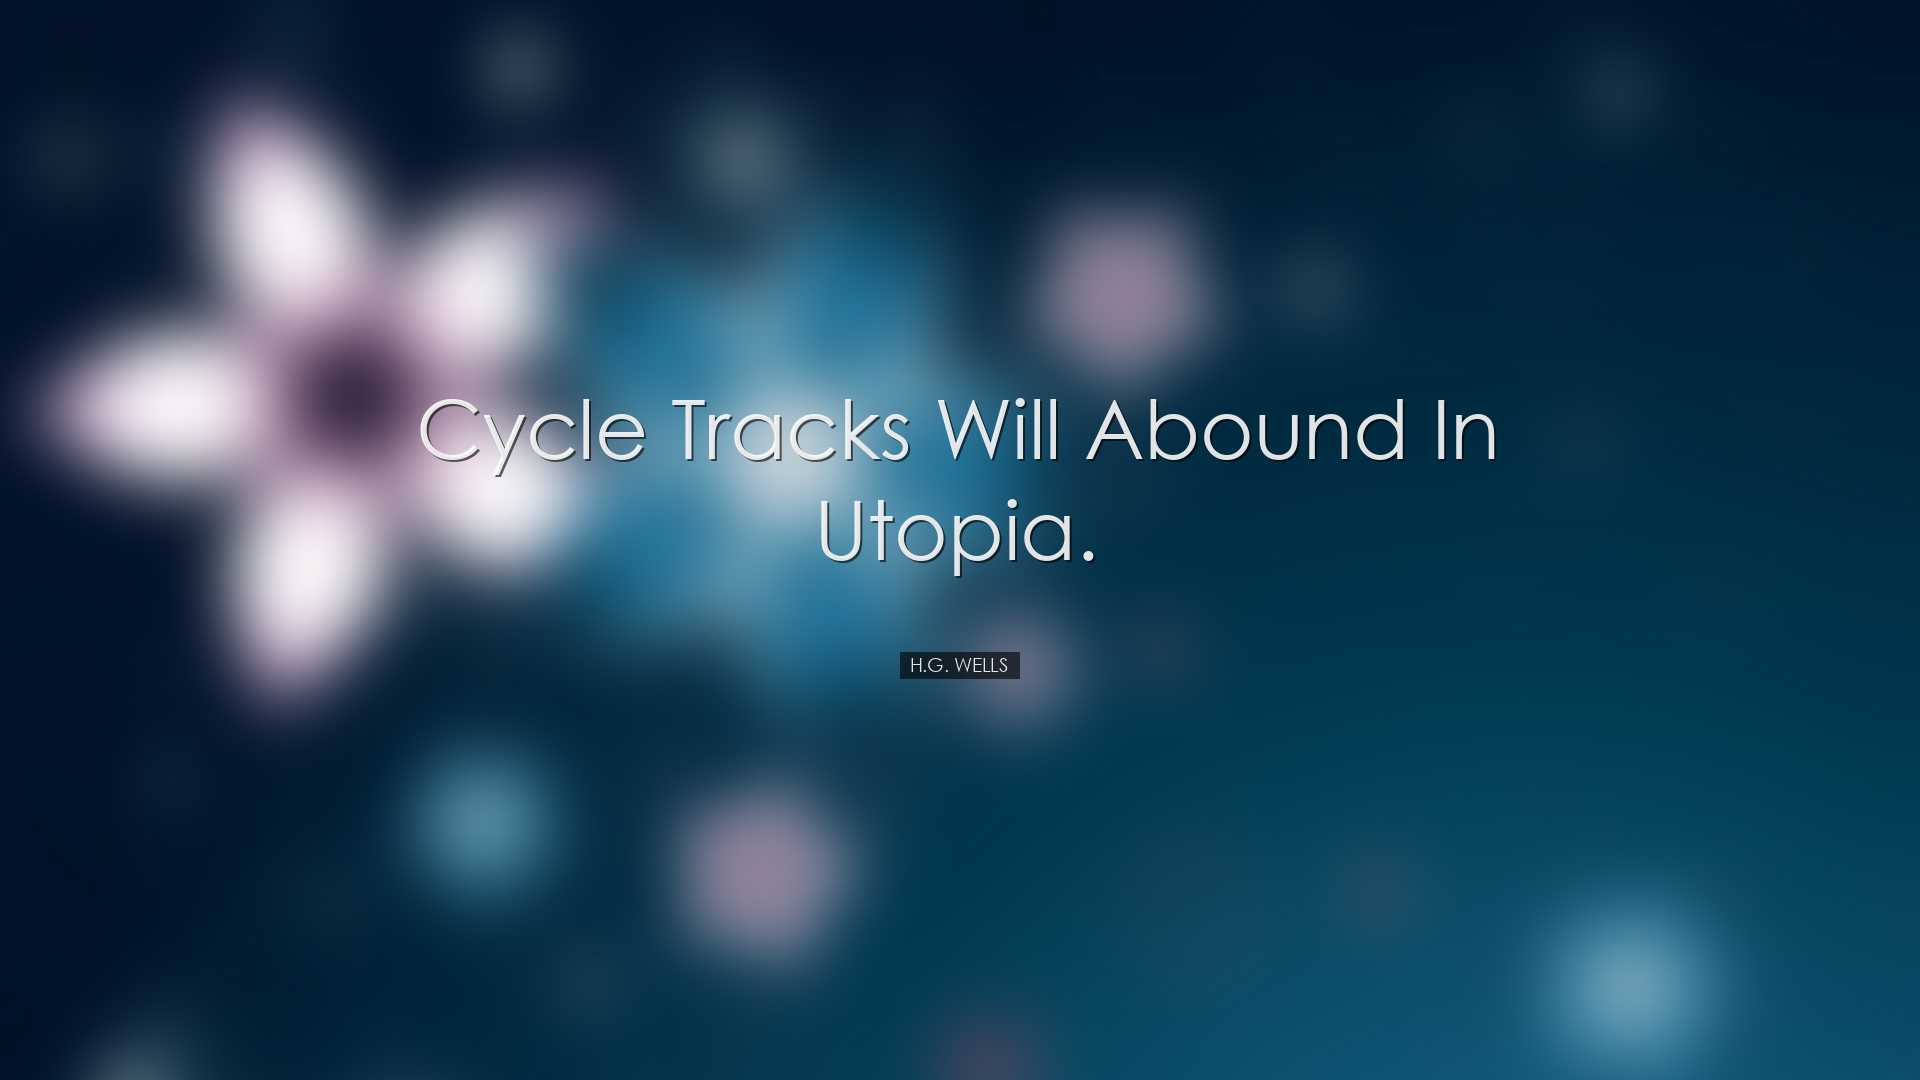 Cycle tracks will abound in Utopia. - H.G. Wells